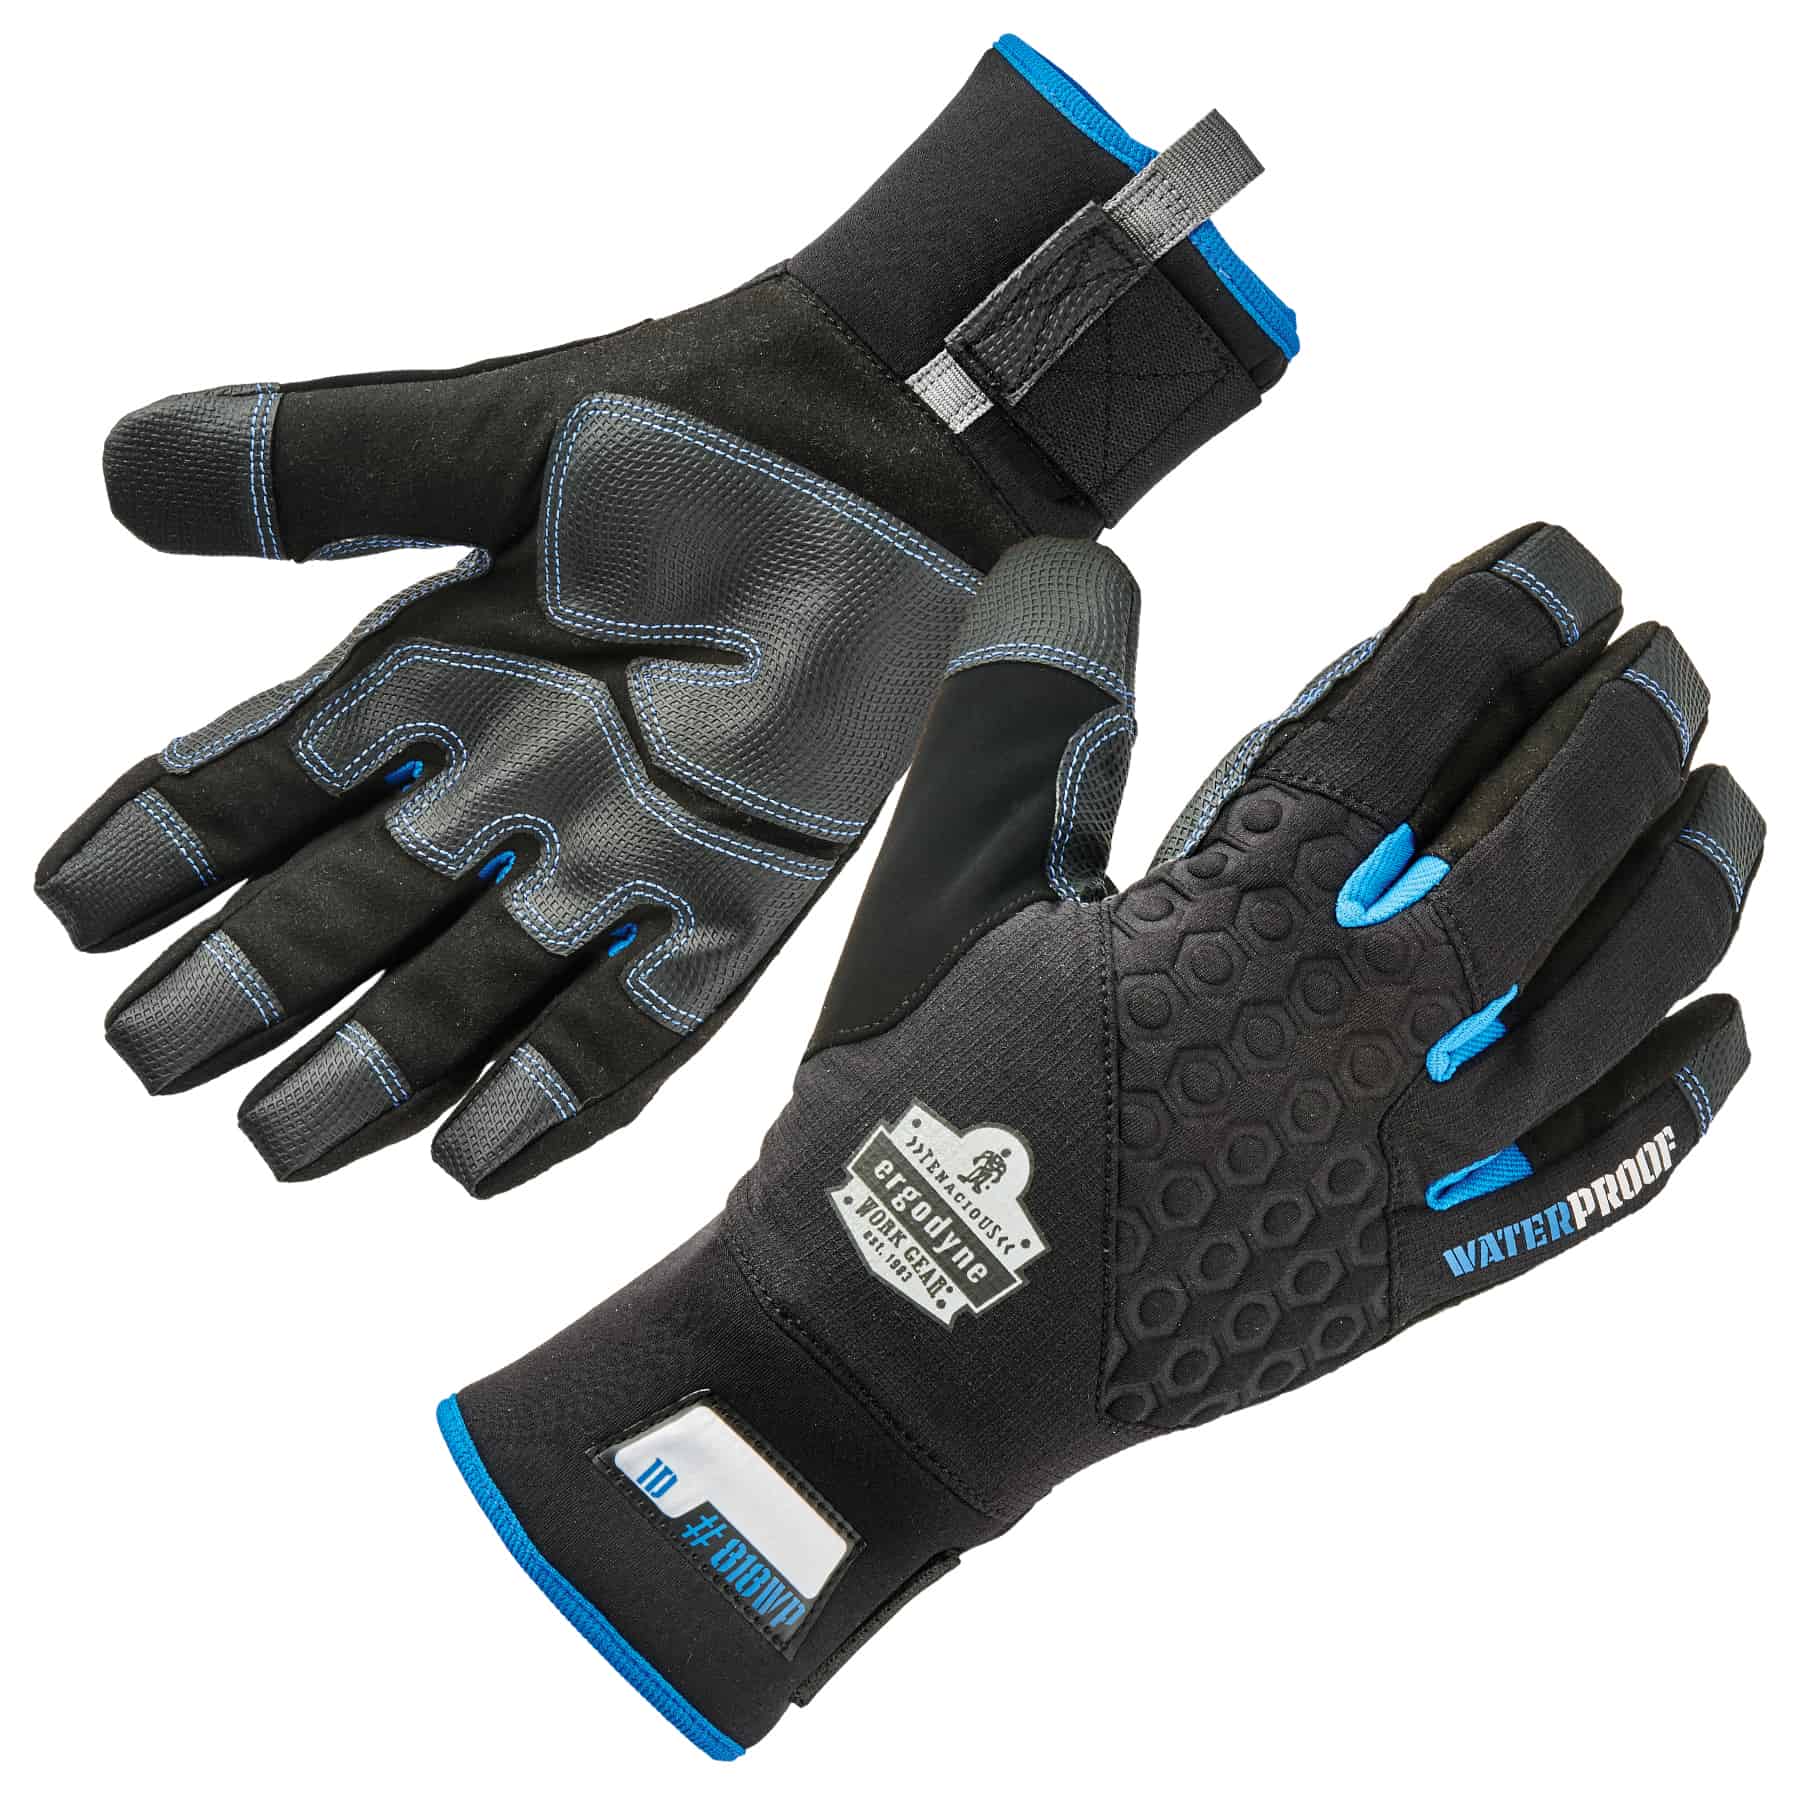 XL Latex Coated Cotton Poly Work Gloves - Gray/Blue - TruForce - Industrial  and Personal Safety Products from